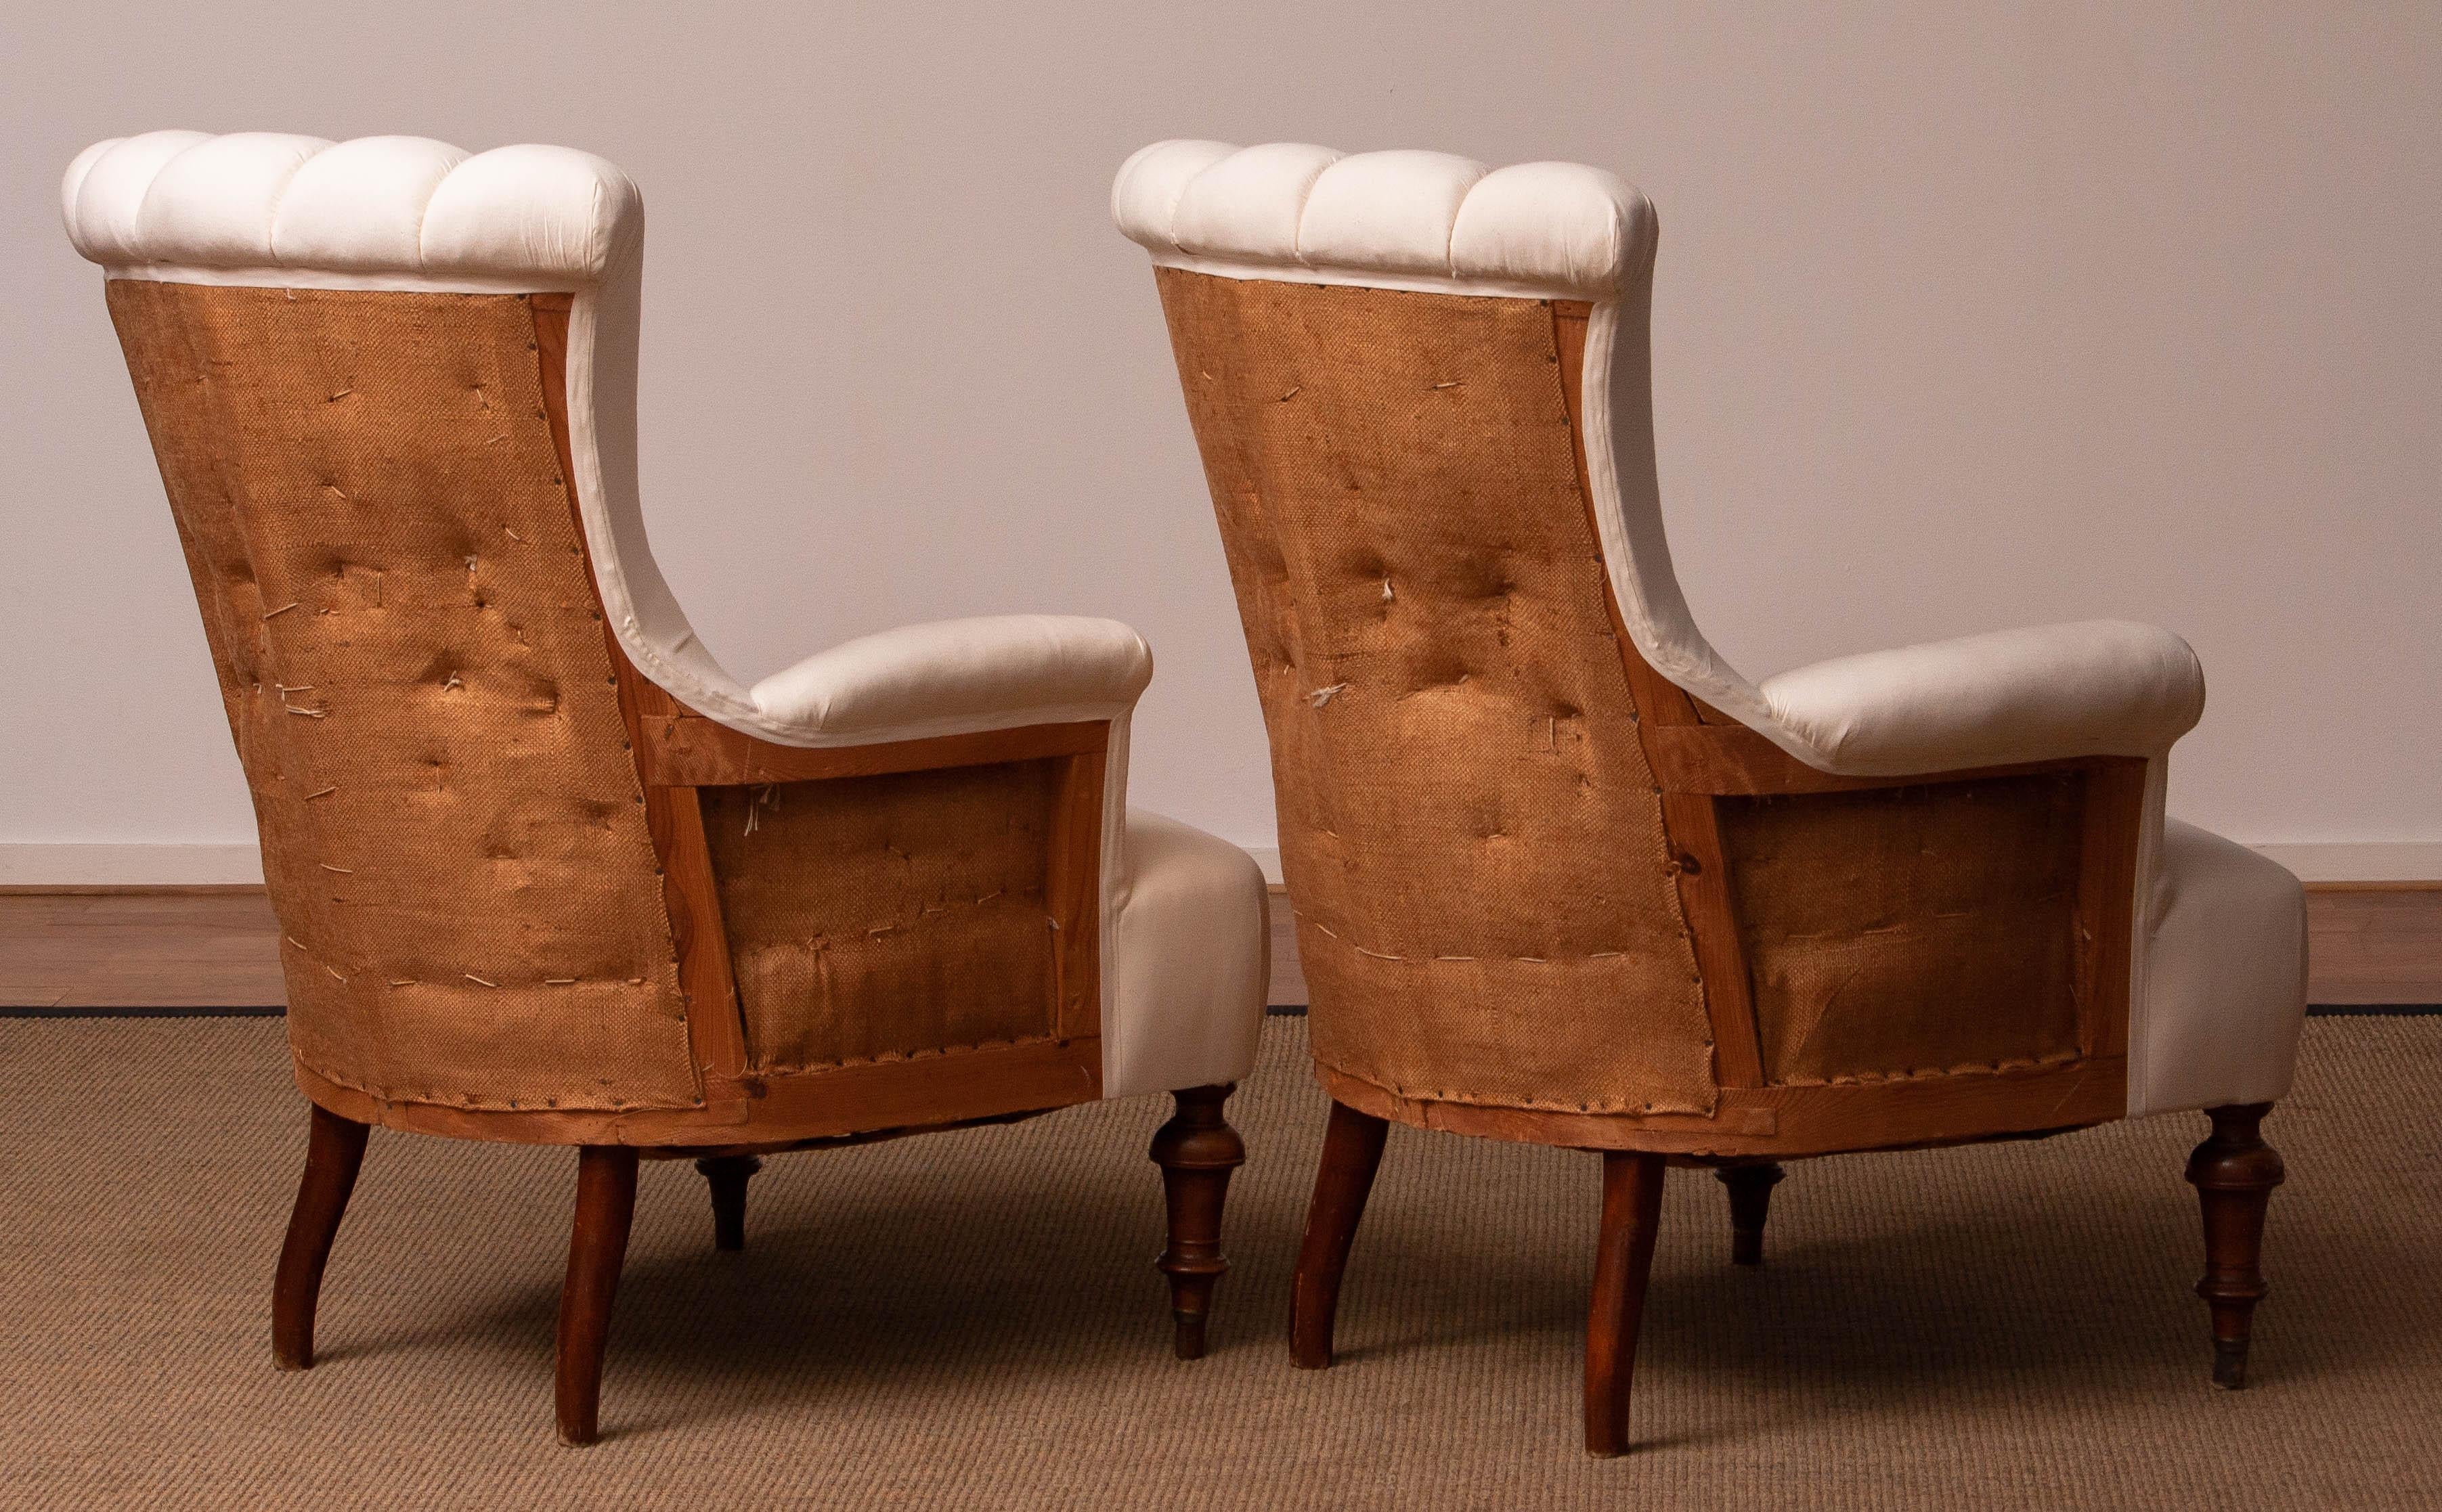 Pair Domestic Cotton Victorian 'Deconstructed' Tufted Scroll-back Chair, 1900 For Sale 1